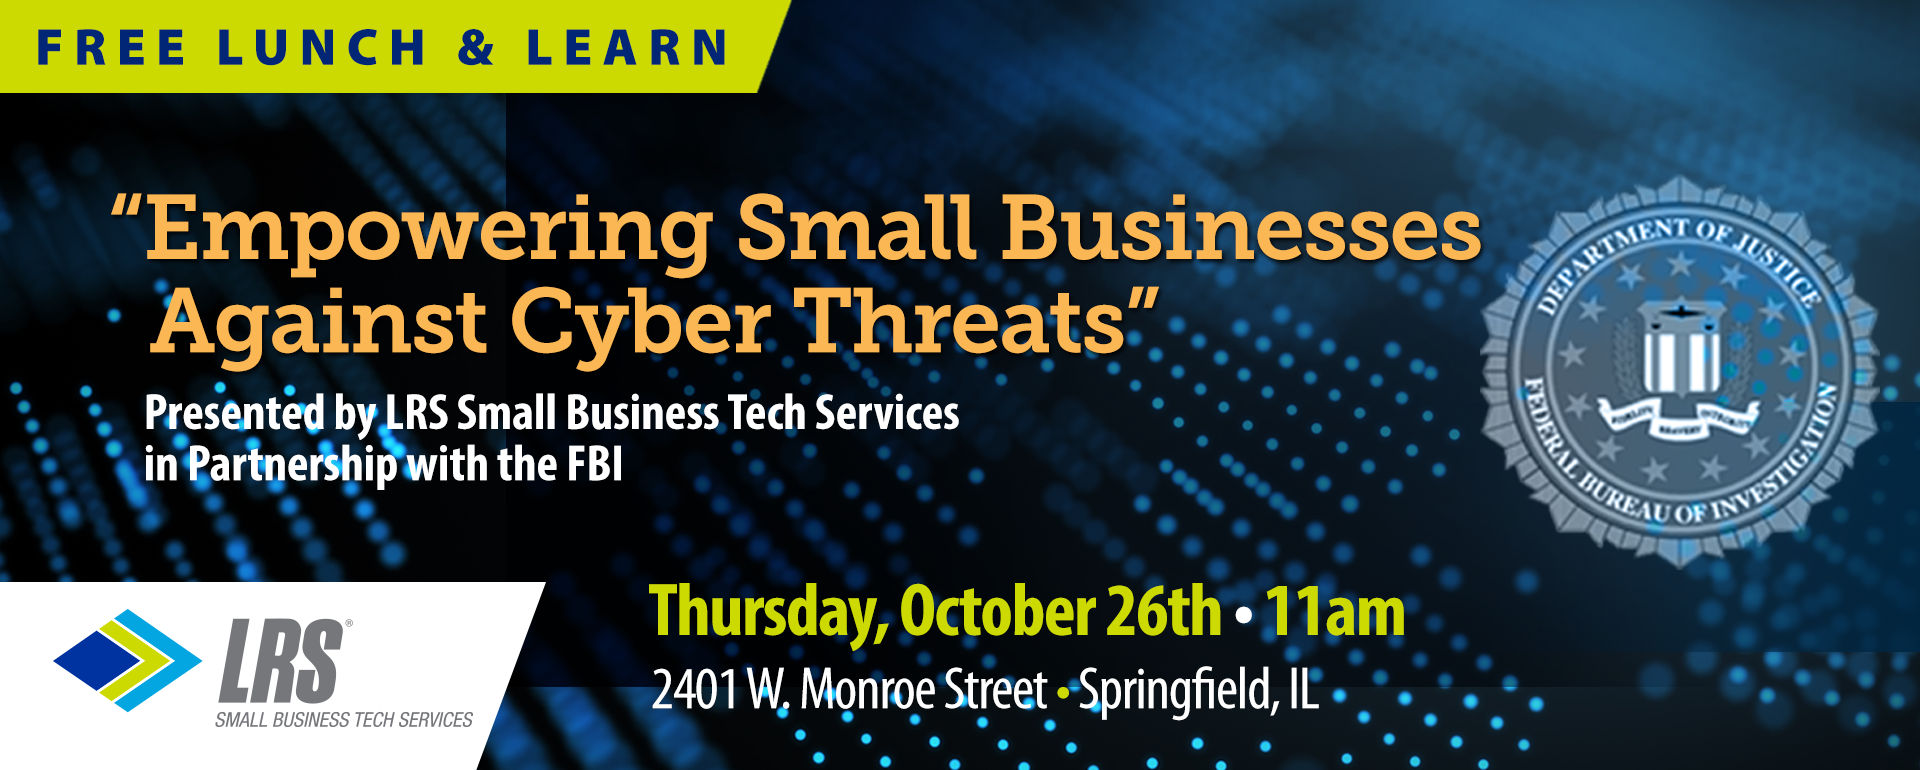 Empowering Small Businesses Against Cyber Attacks Event